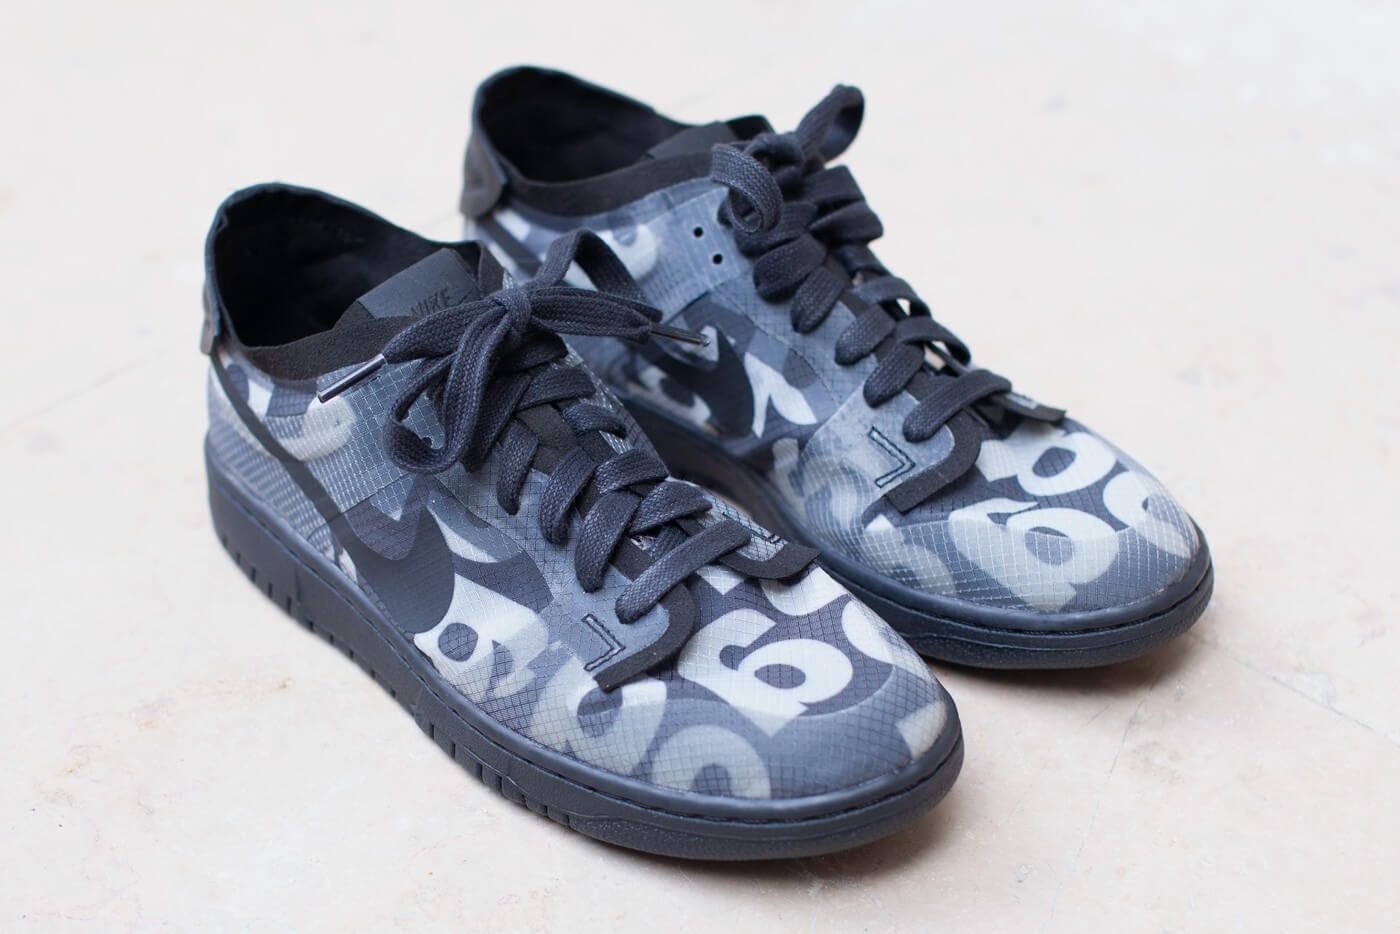 CDG goes hard with this Nike SB Dunks 